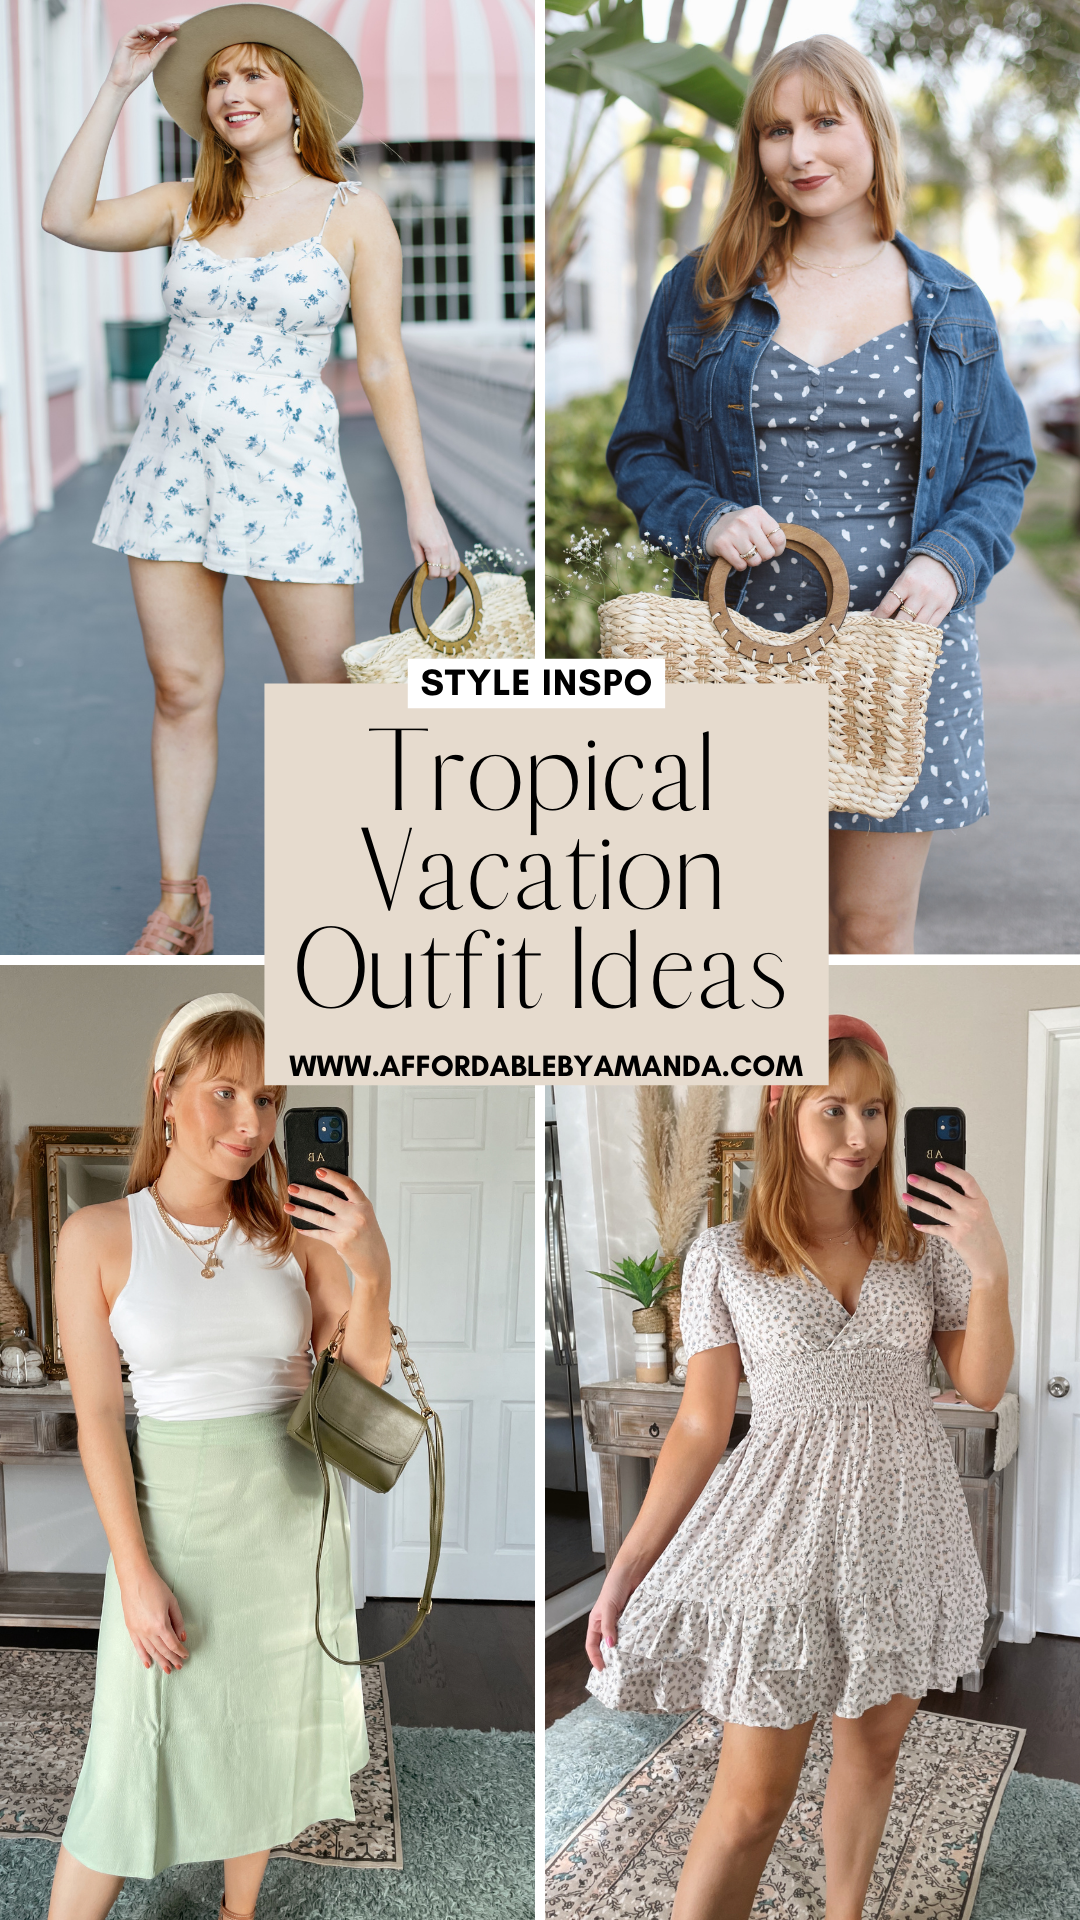 Tropical Vacation Outfit Ideas - Vacation Outfit Ideas 2021 - Spring Outfit Ideas - Best Tropical Vacation Outfits